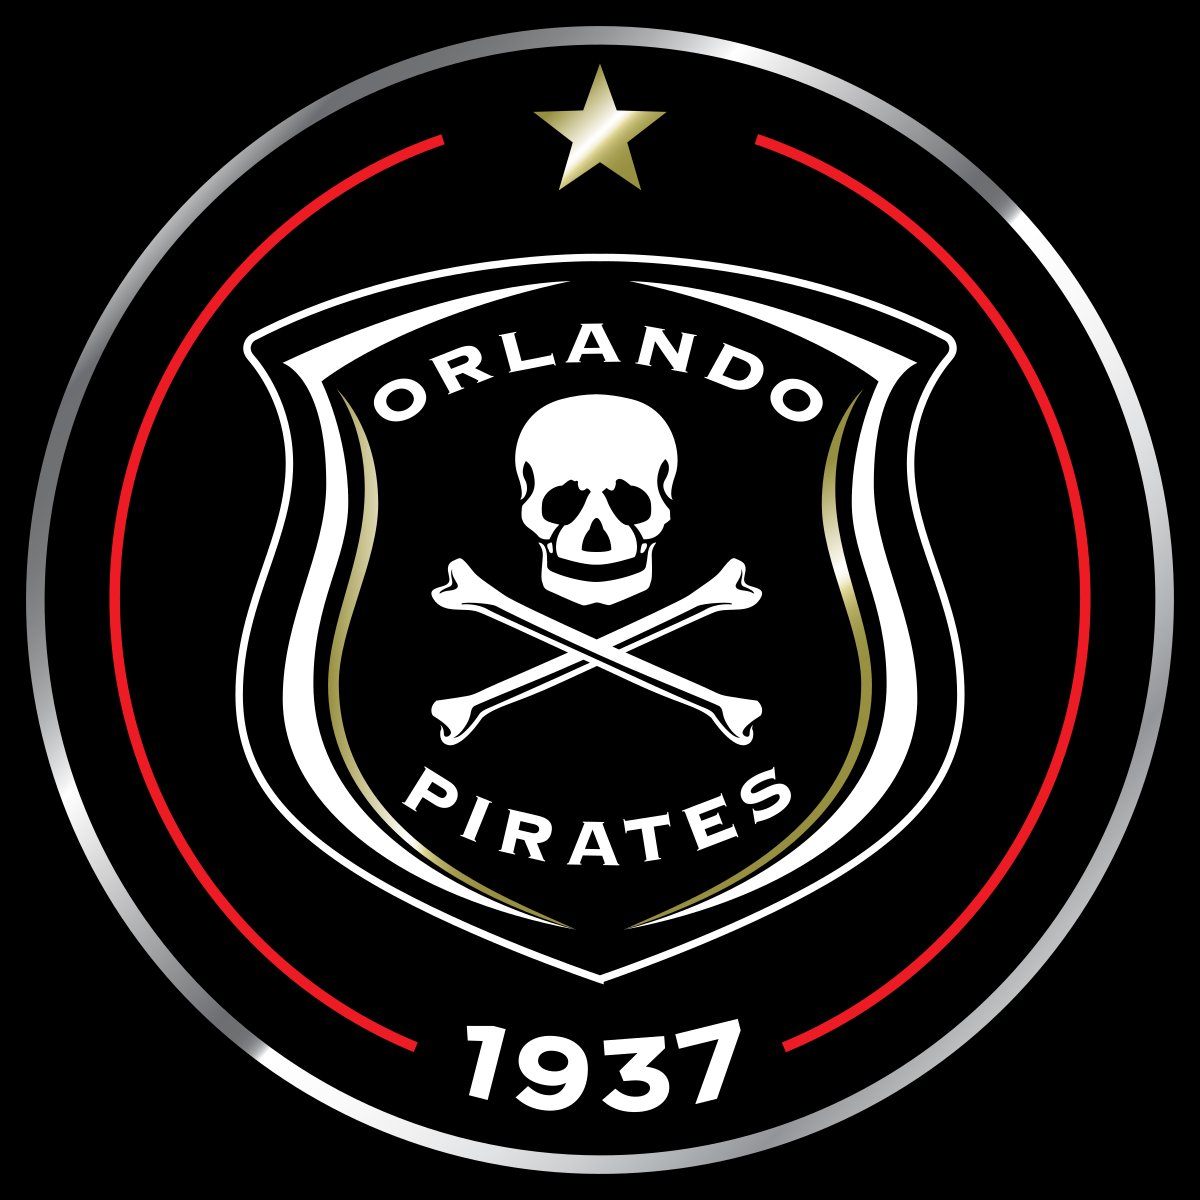 I want to see this badge in the CAFCL so bad💔💔💔😭😭😭.